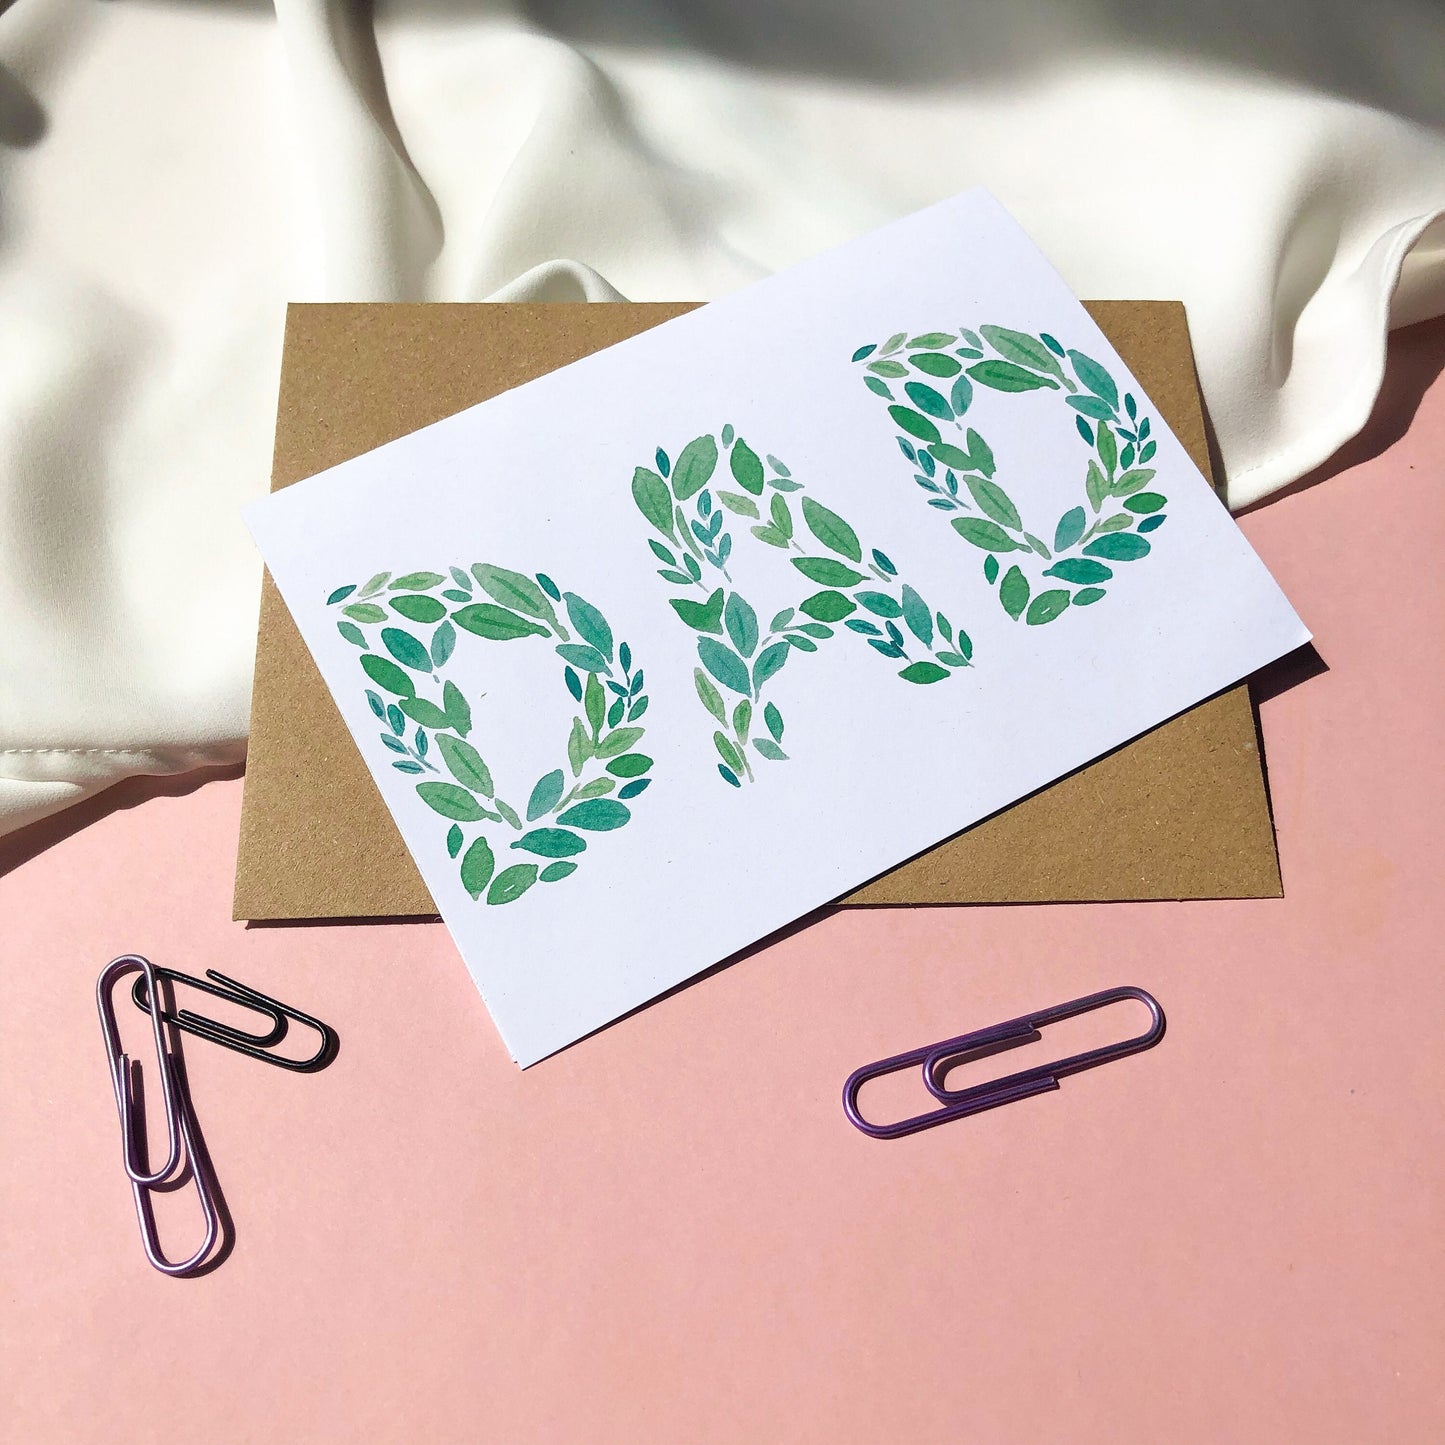 A Father's Day card with the word "DAD" spelled out beautifully in green leaves of various shades and shapes. The card offers a simple yet elegant way to show appreciation and affection for a beloved dad on his special day. the card is being held against a pink background